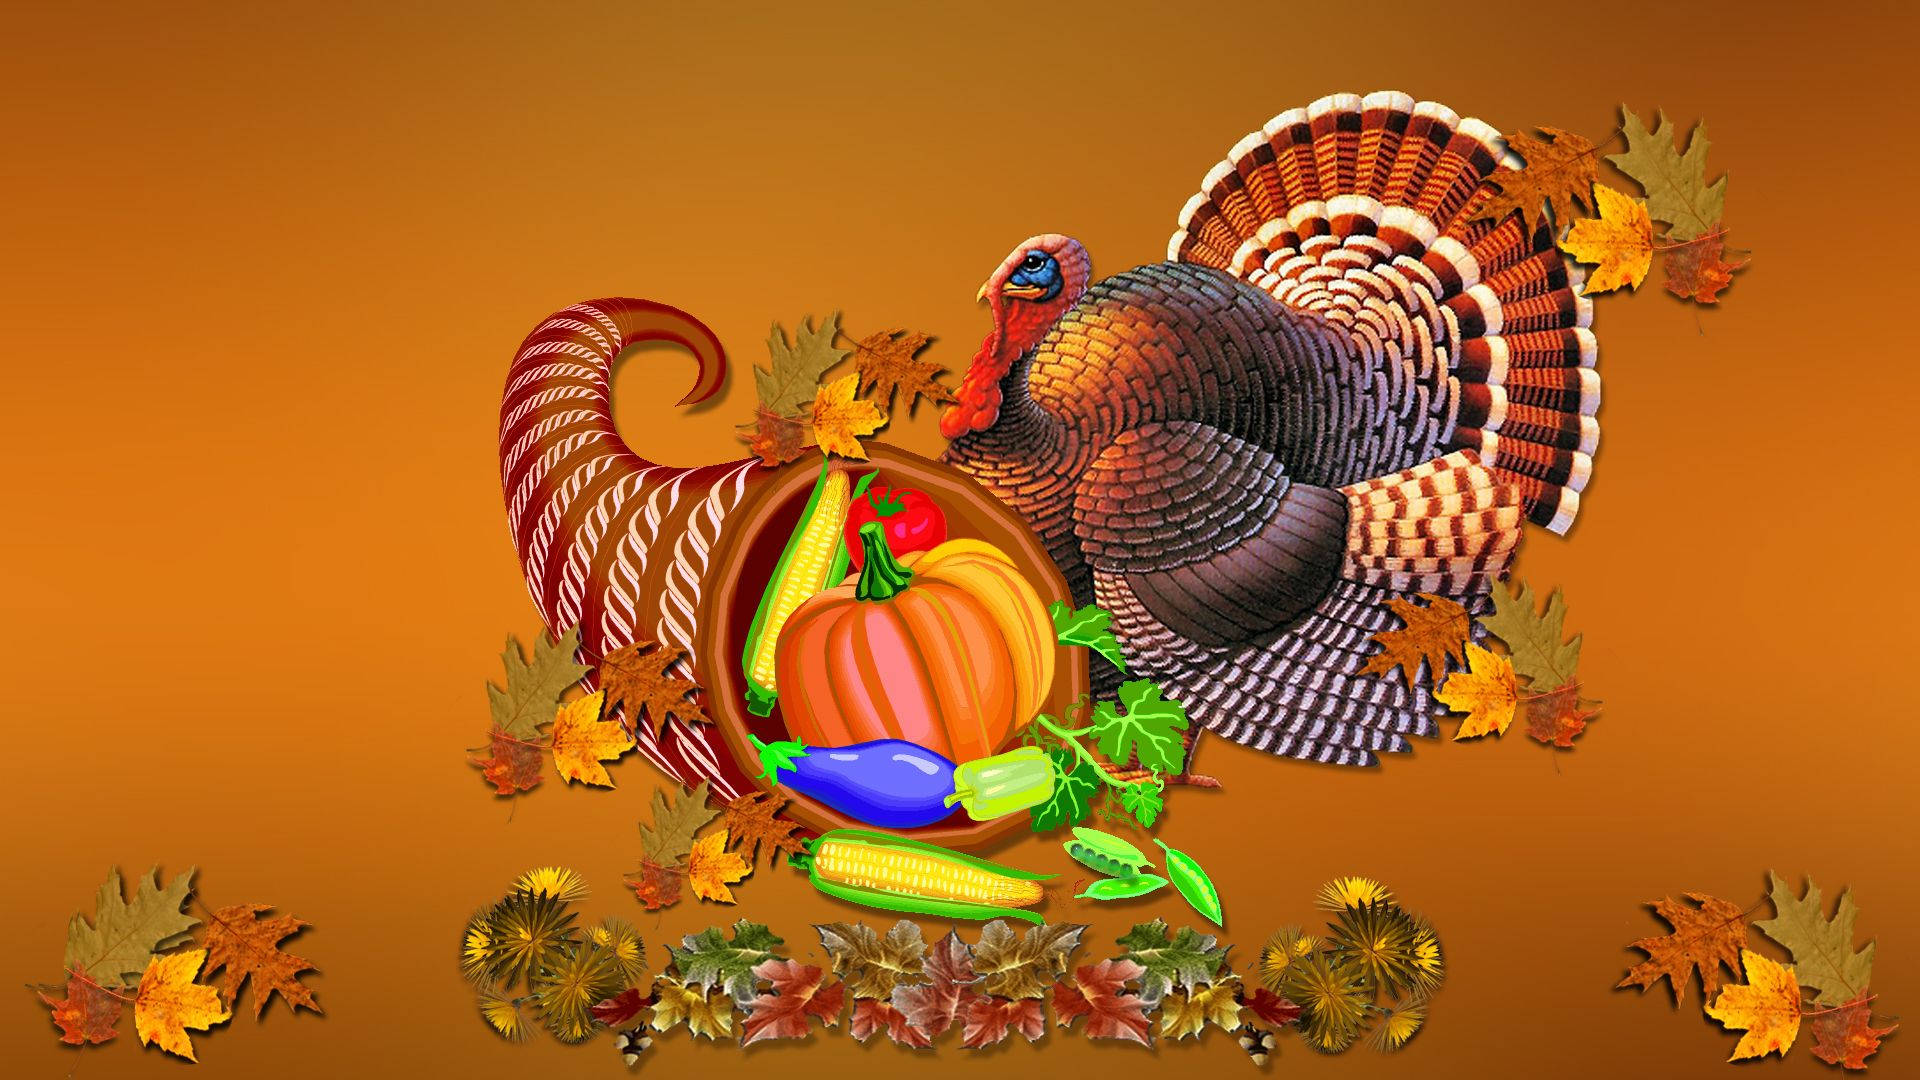 Enjoy a bountiful Thanksgiving with family and friends Wallpaper